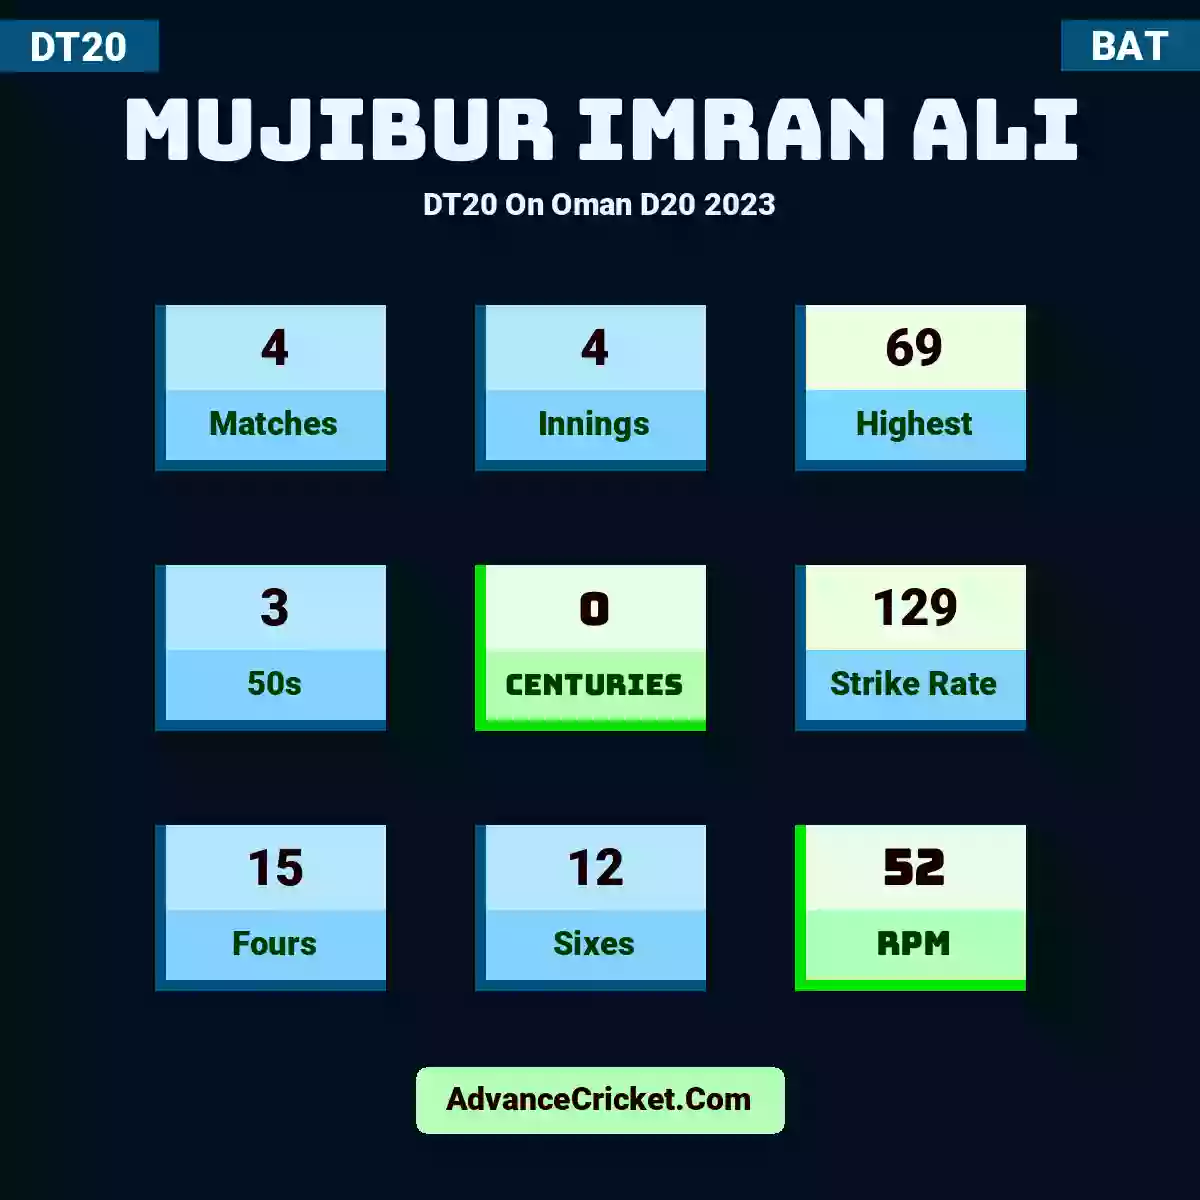 Mujibur Imran Ali DT20  On Oman D20 2023, Mujibur Imran Ali played 4 matches, scored 69 runs as highest, 3 half-centuries, and 0 centuries, with a strike rate of 129. m.imran.ali hit 15 fours and 12 sixes, with an RPM of 52.